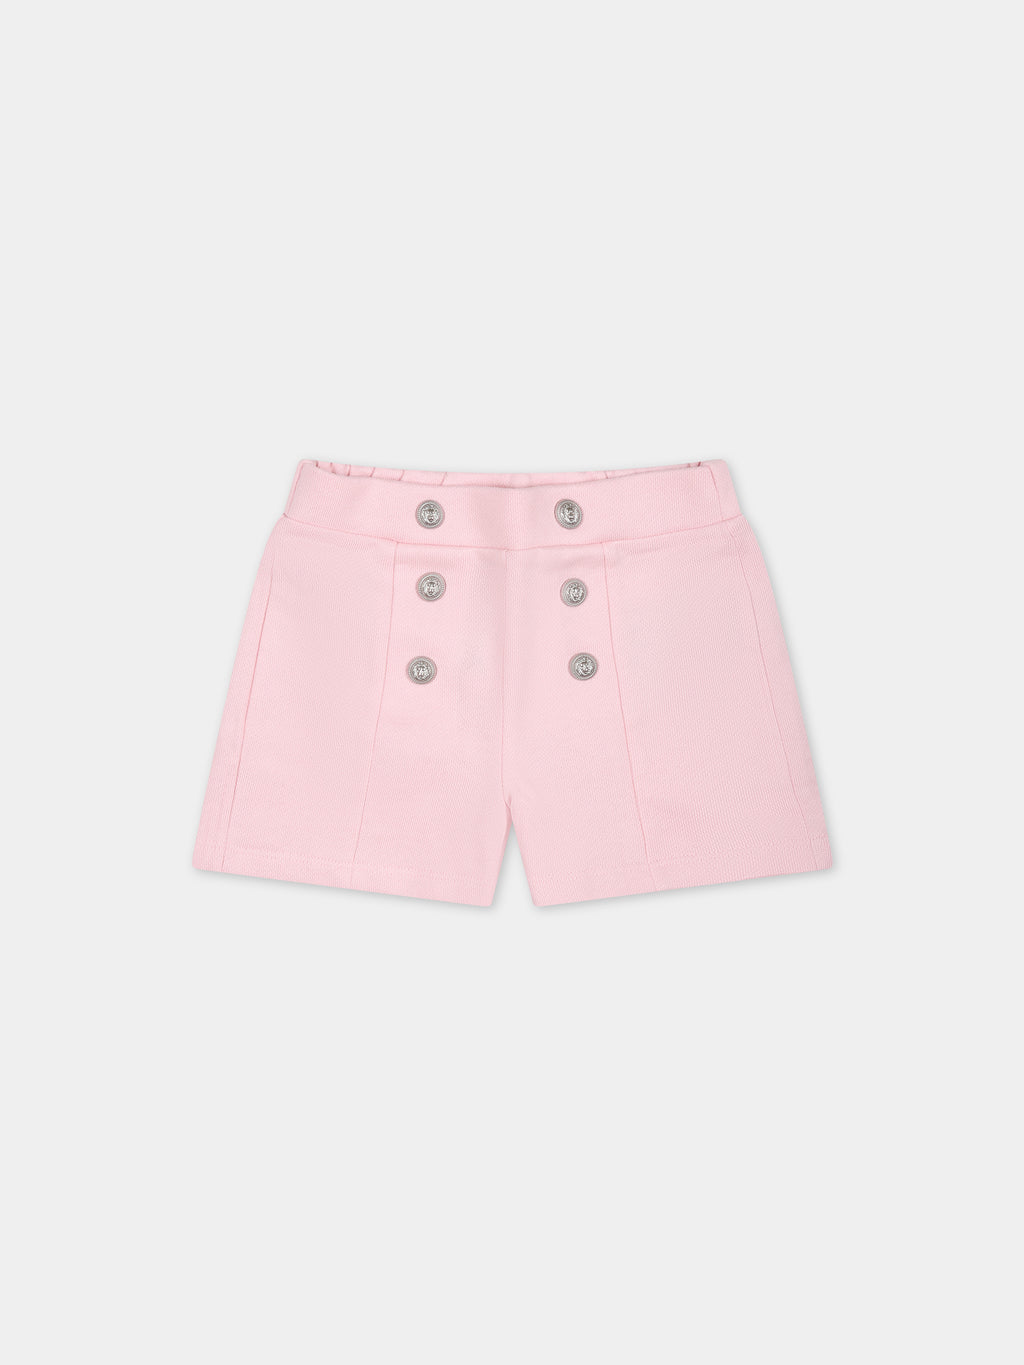 Pink shorts for baby girl with silver buttons